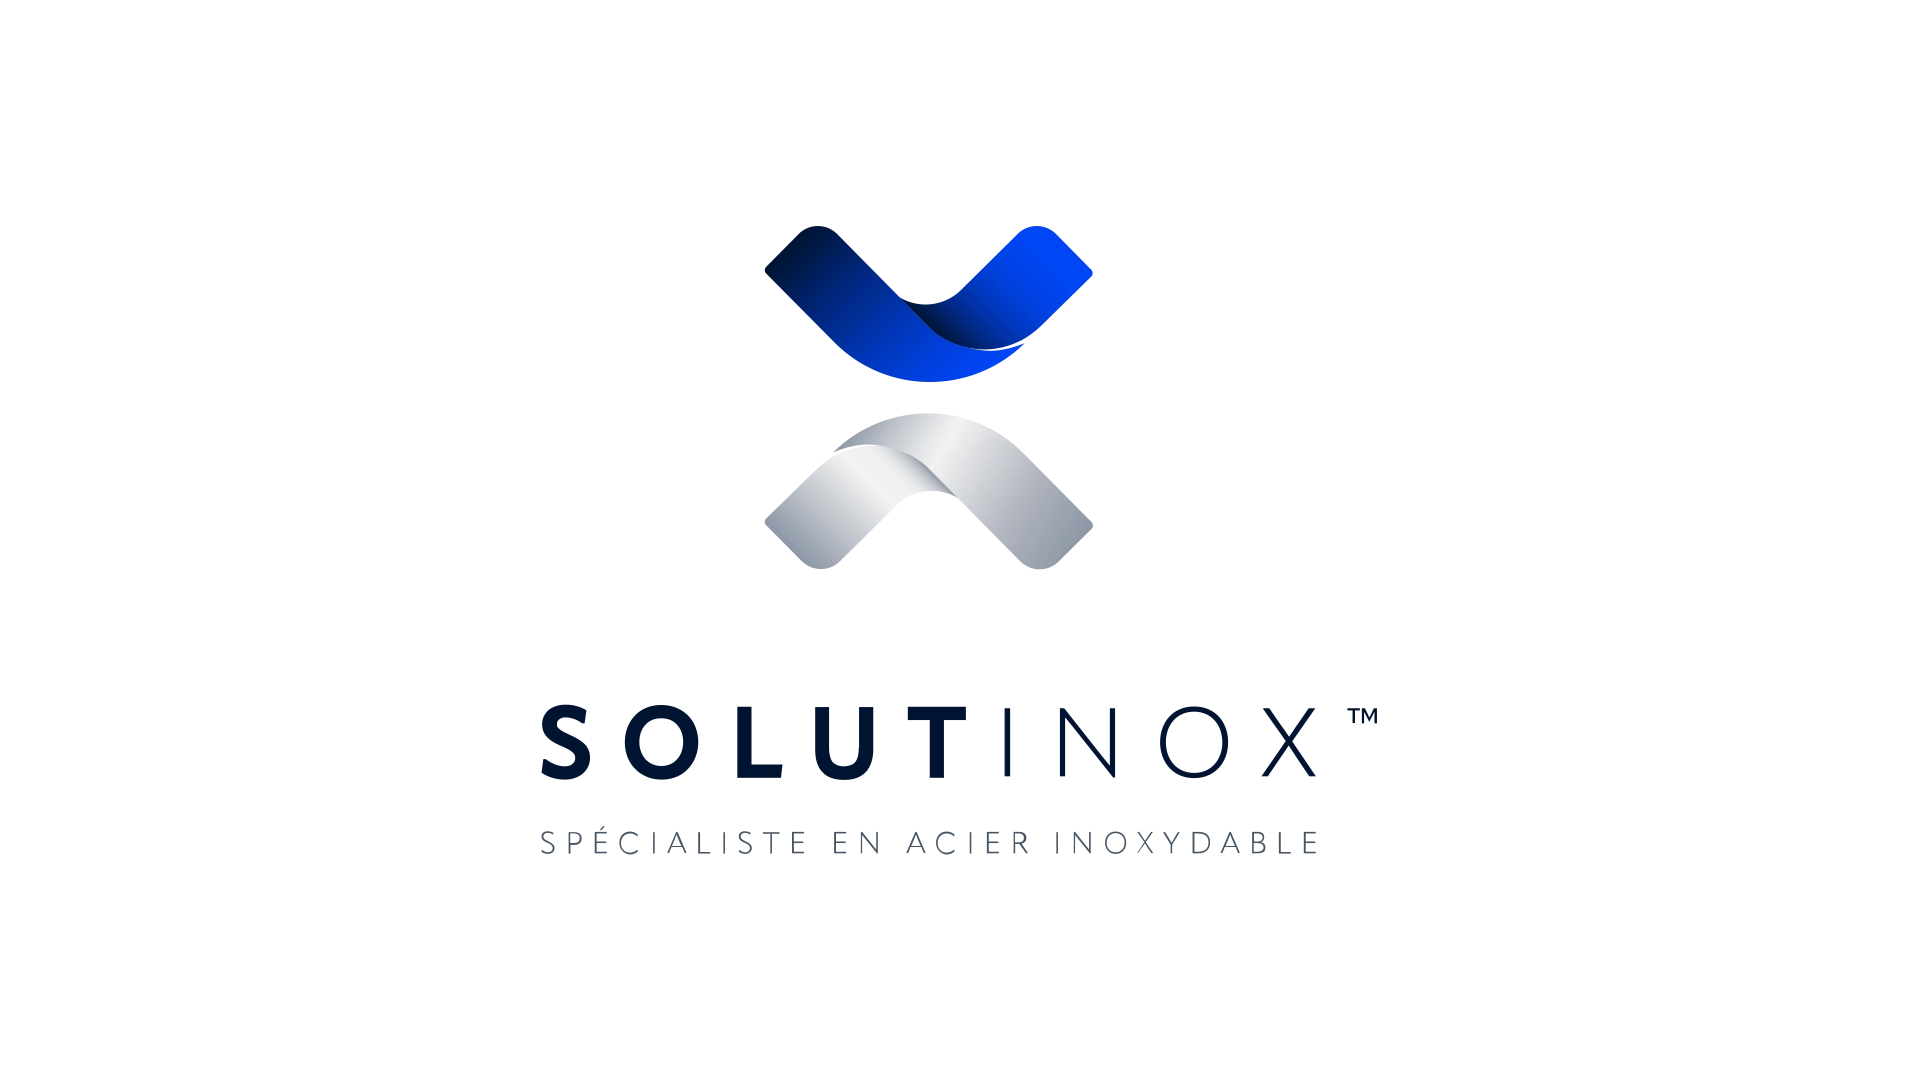 network reach visibility logos clients solutinox